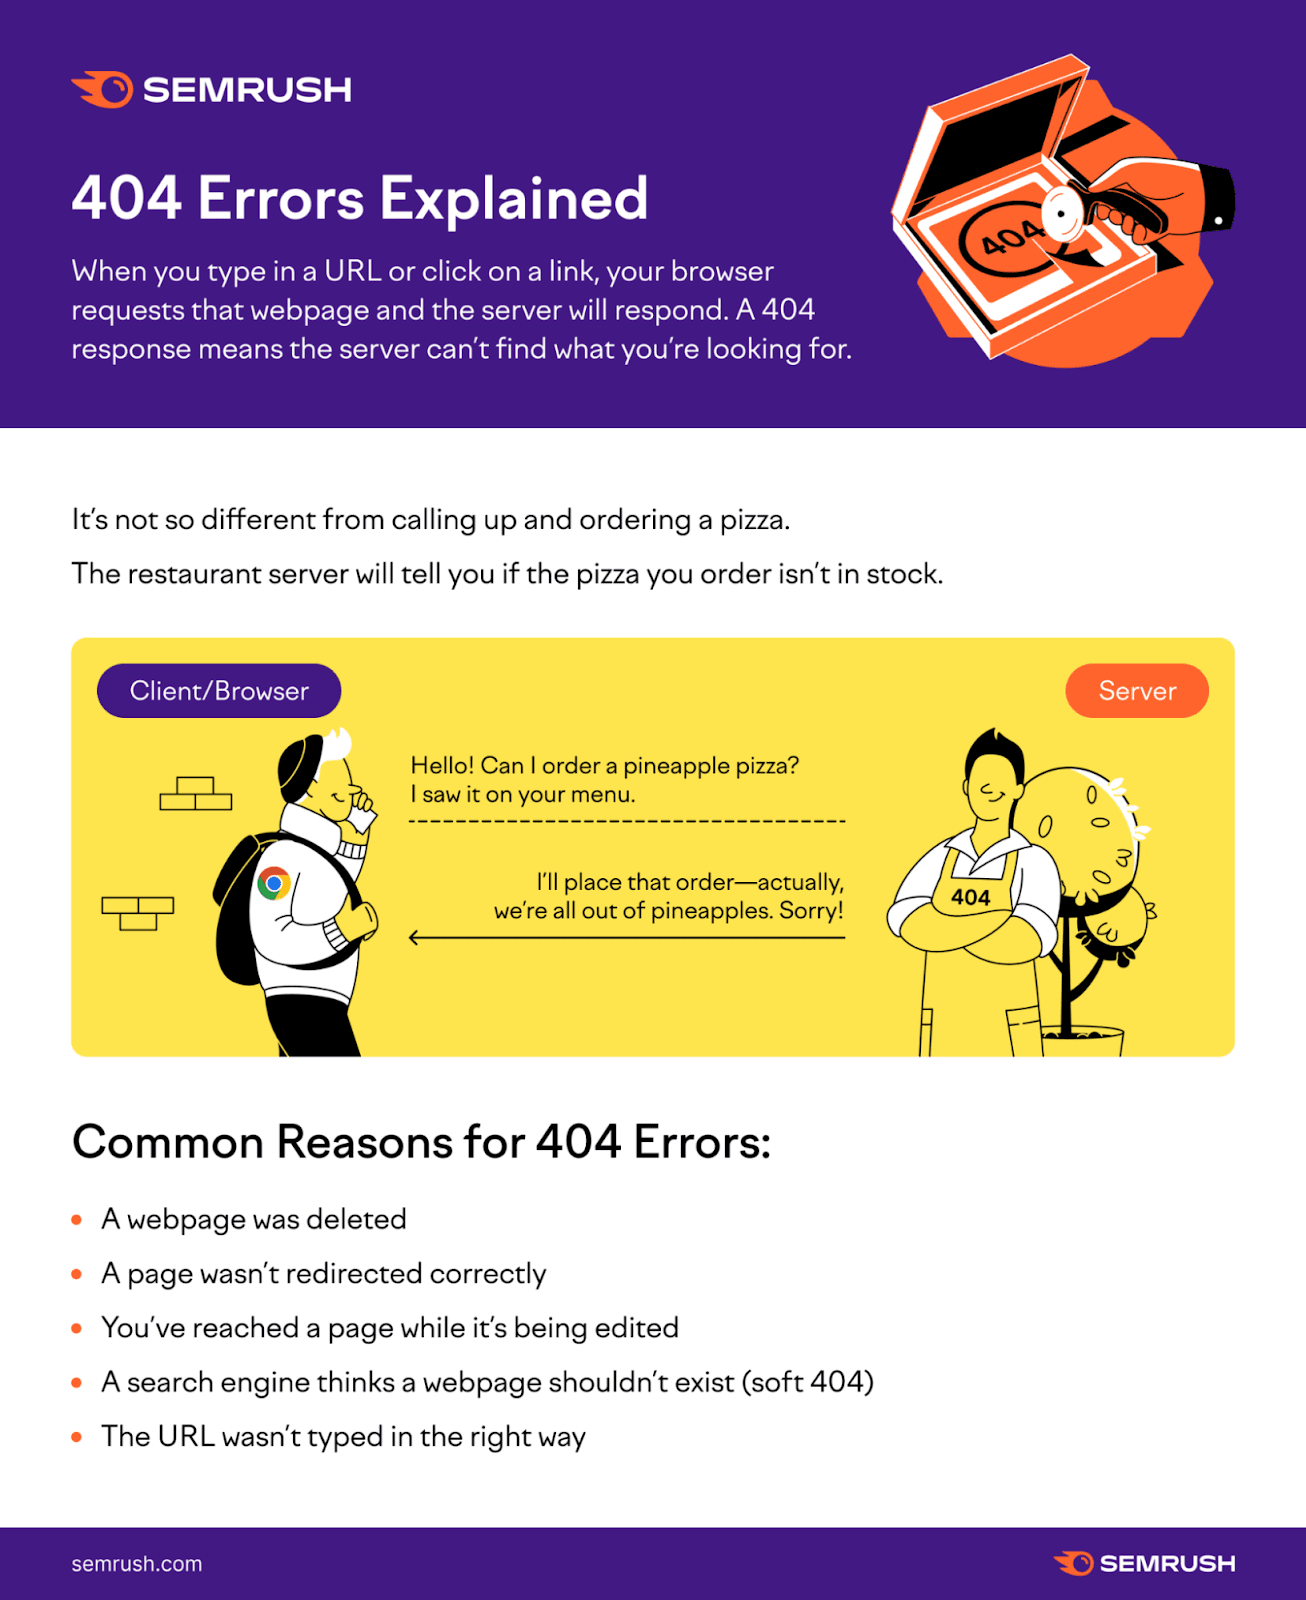 An infographic by Semrush with 404 errors explained